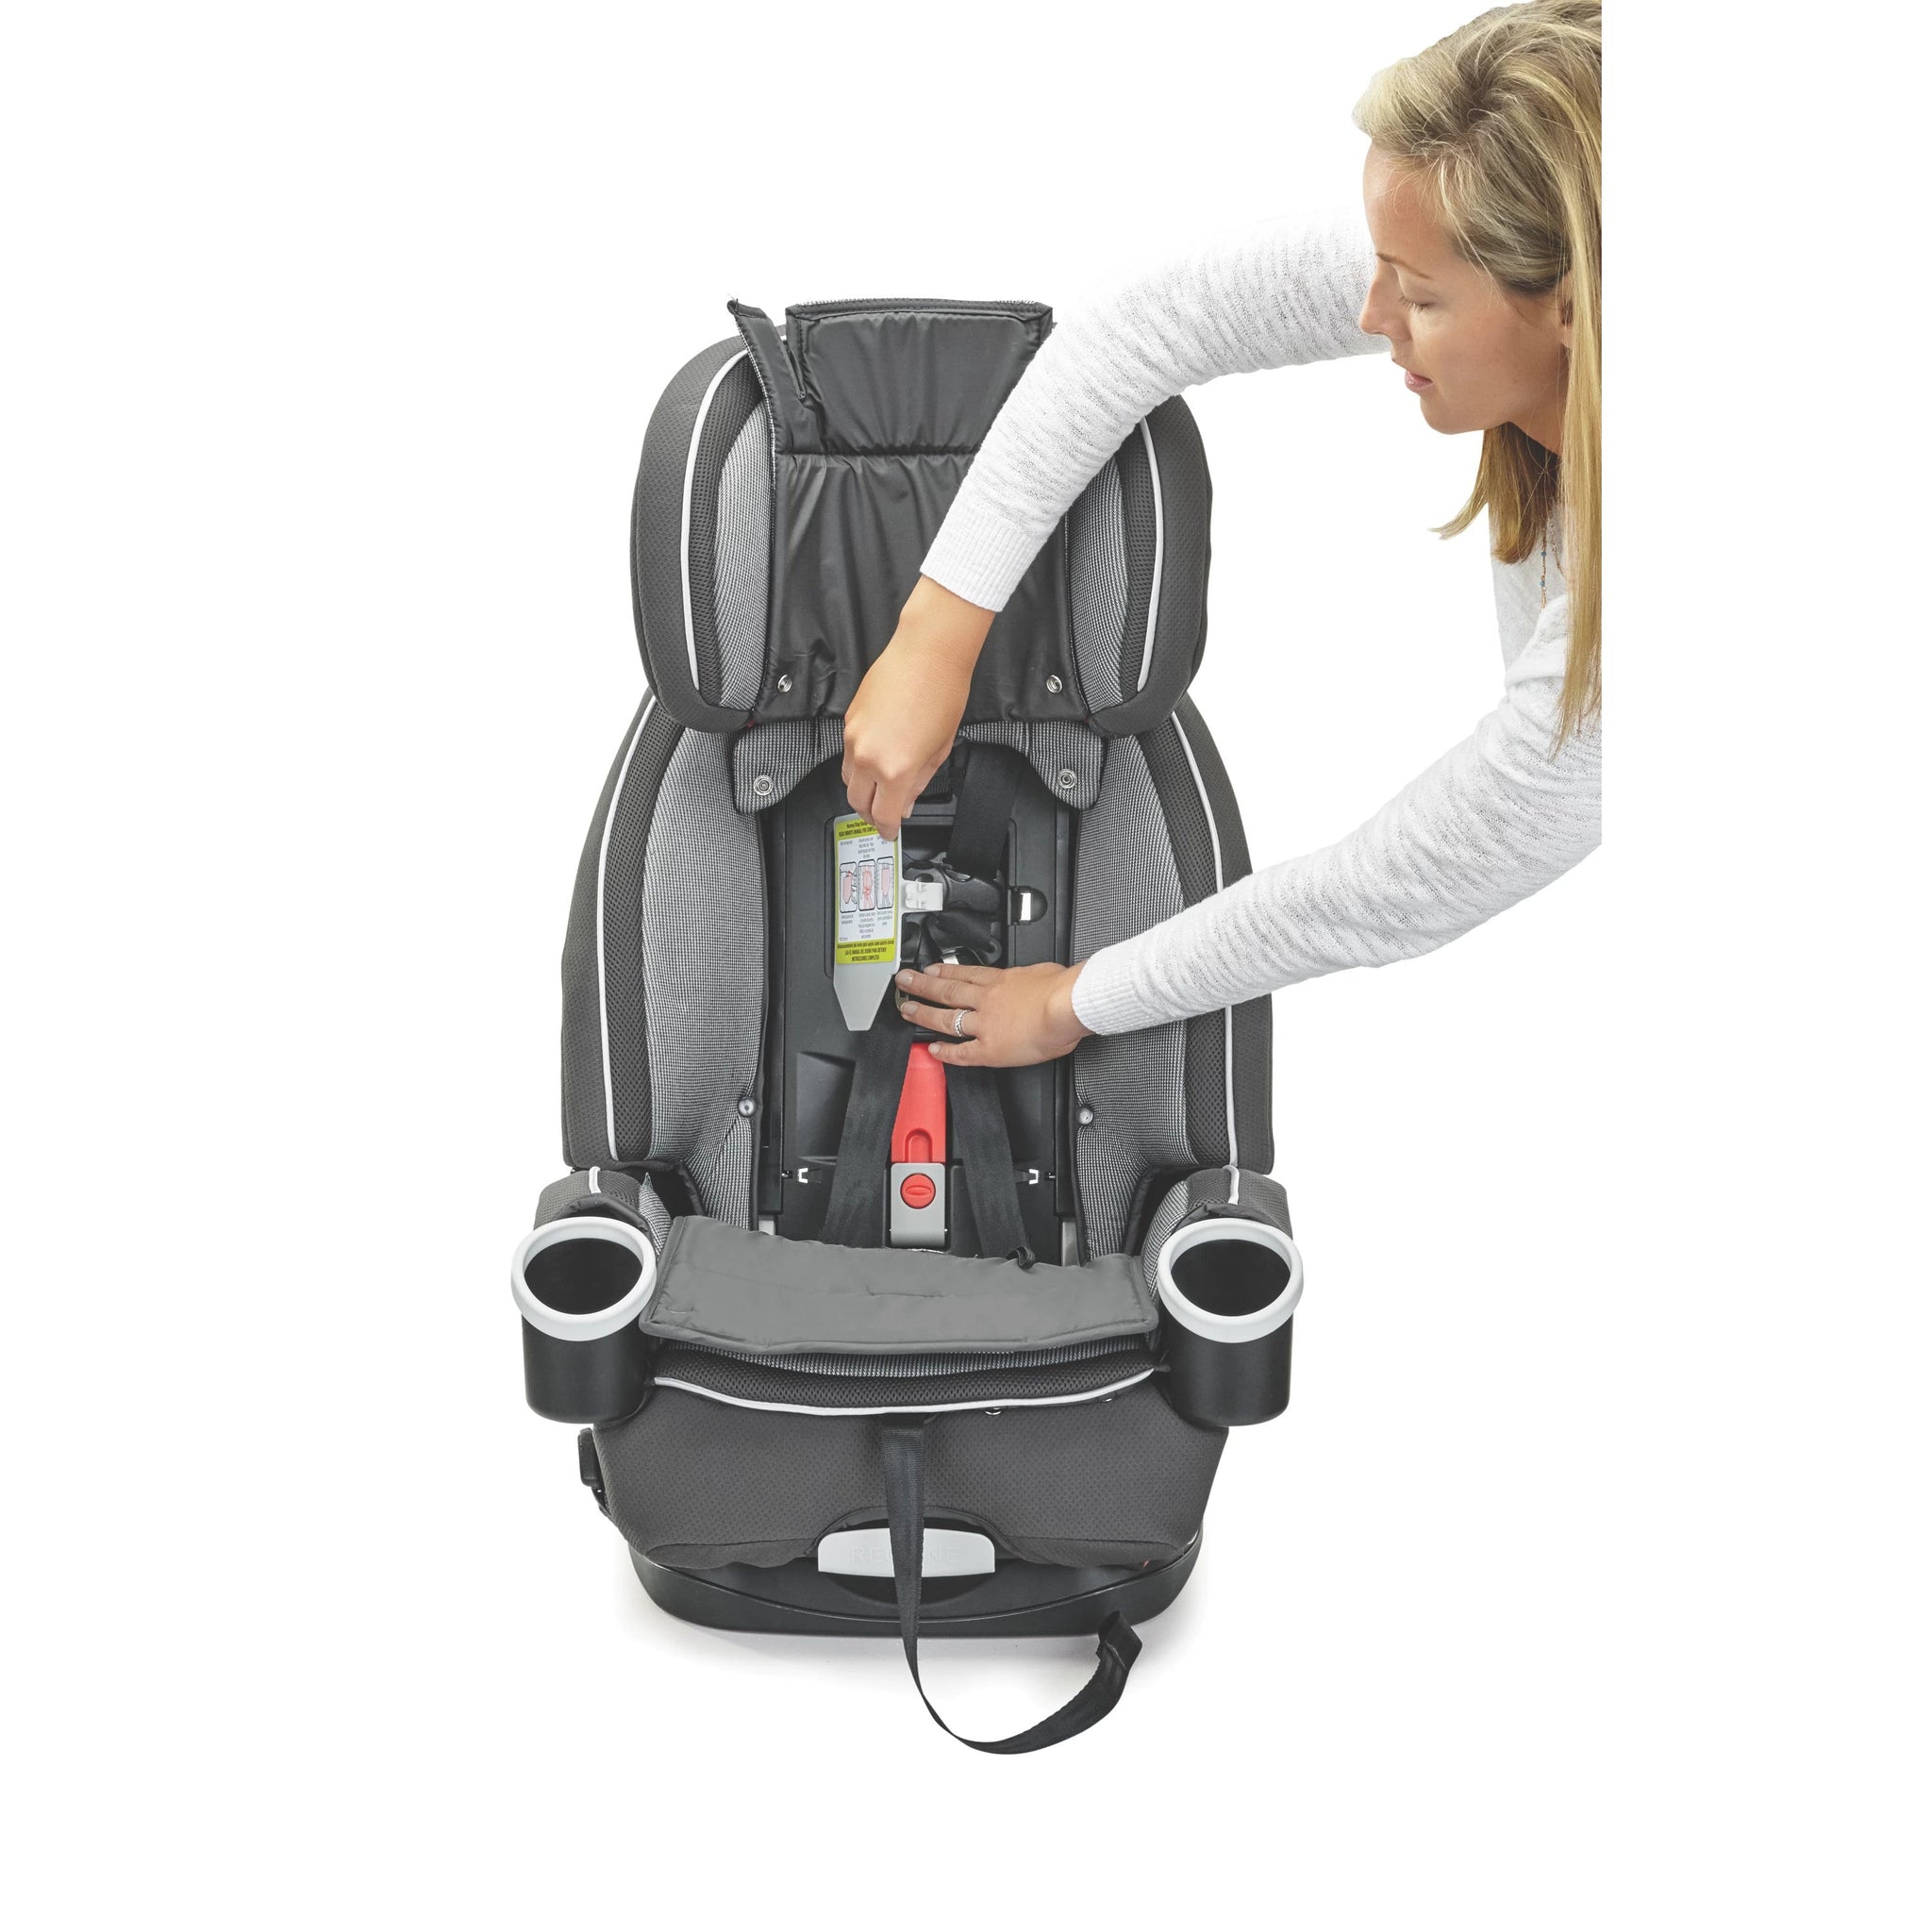 Graco 4Ever® DLX 4-in-1 Convertible Car Seat- Faimont – Babies "R" Us